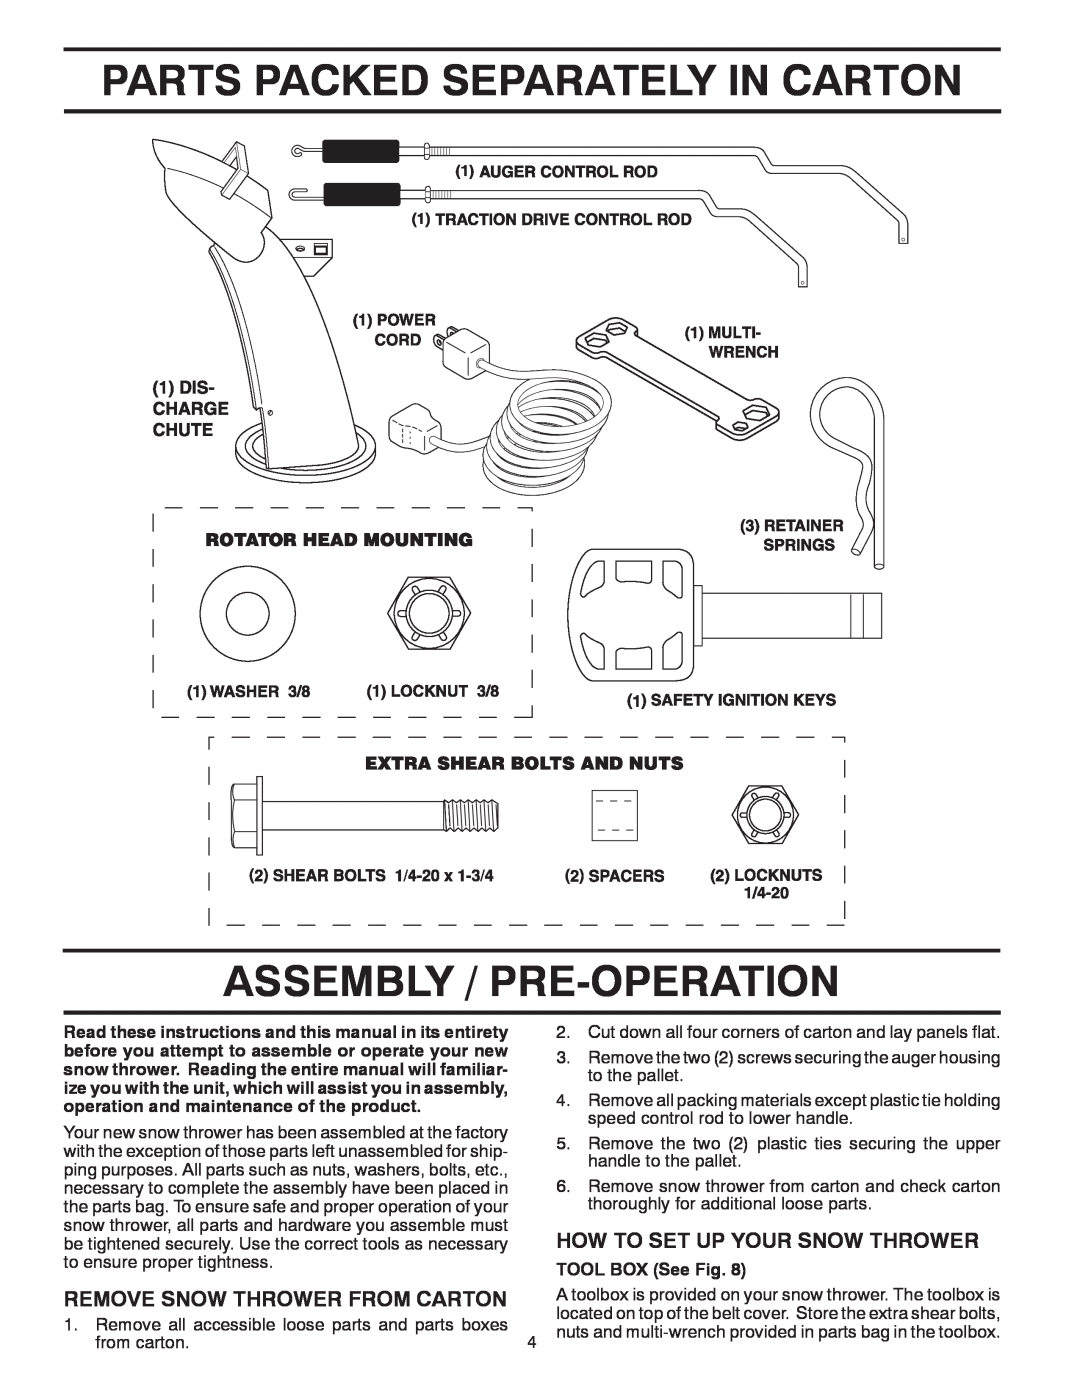 Poulan 419002 owner manual Parts Packed Separately In Carton, Assembly / Pre-Operation, How To Set Up Your Snow Thrower 